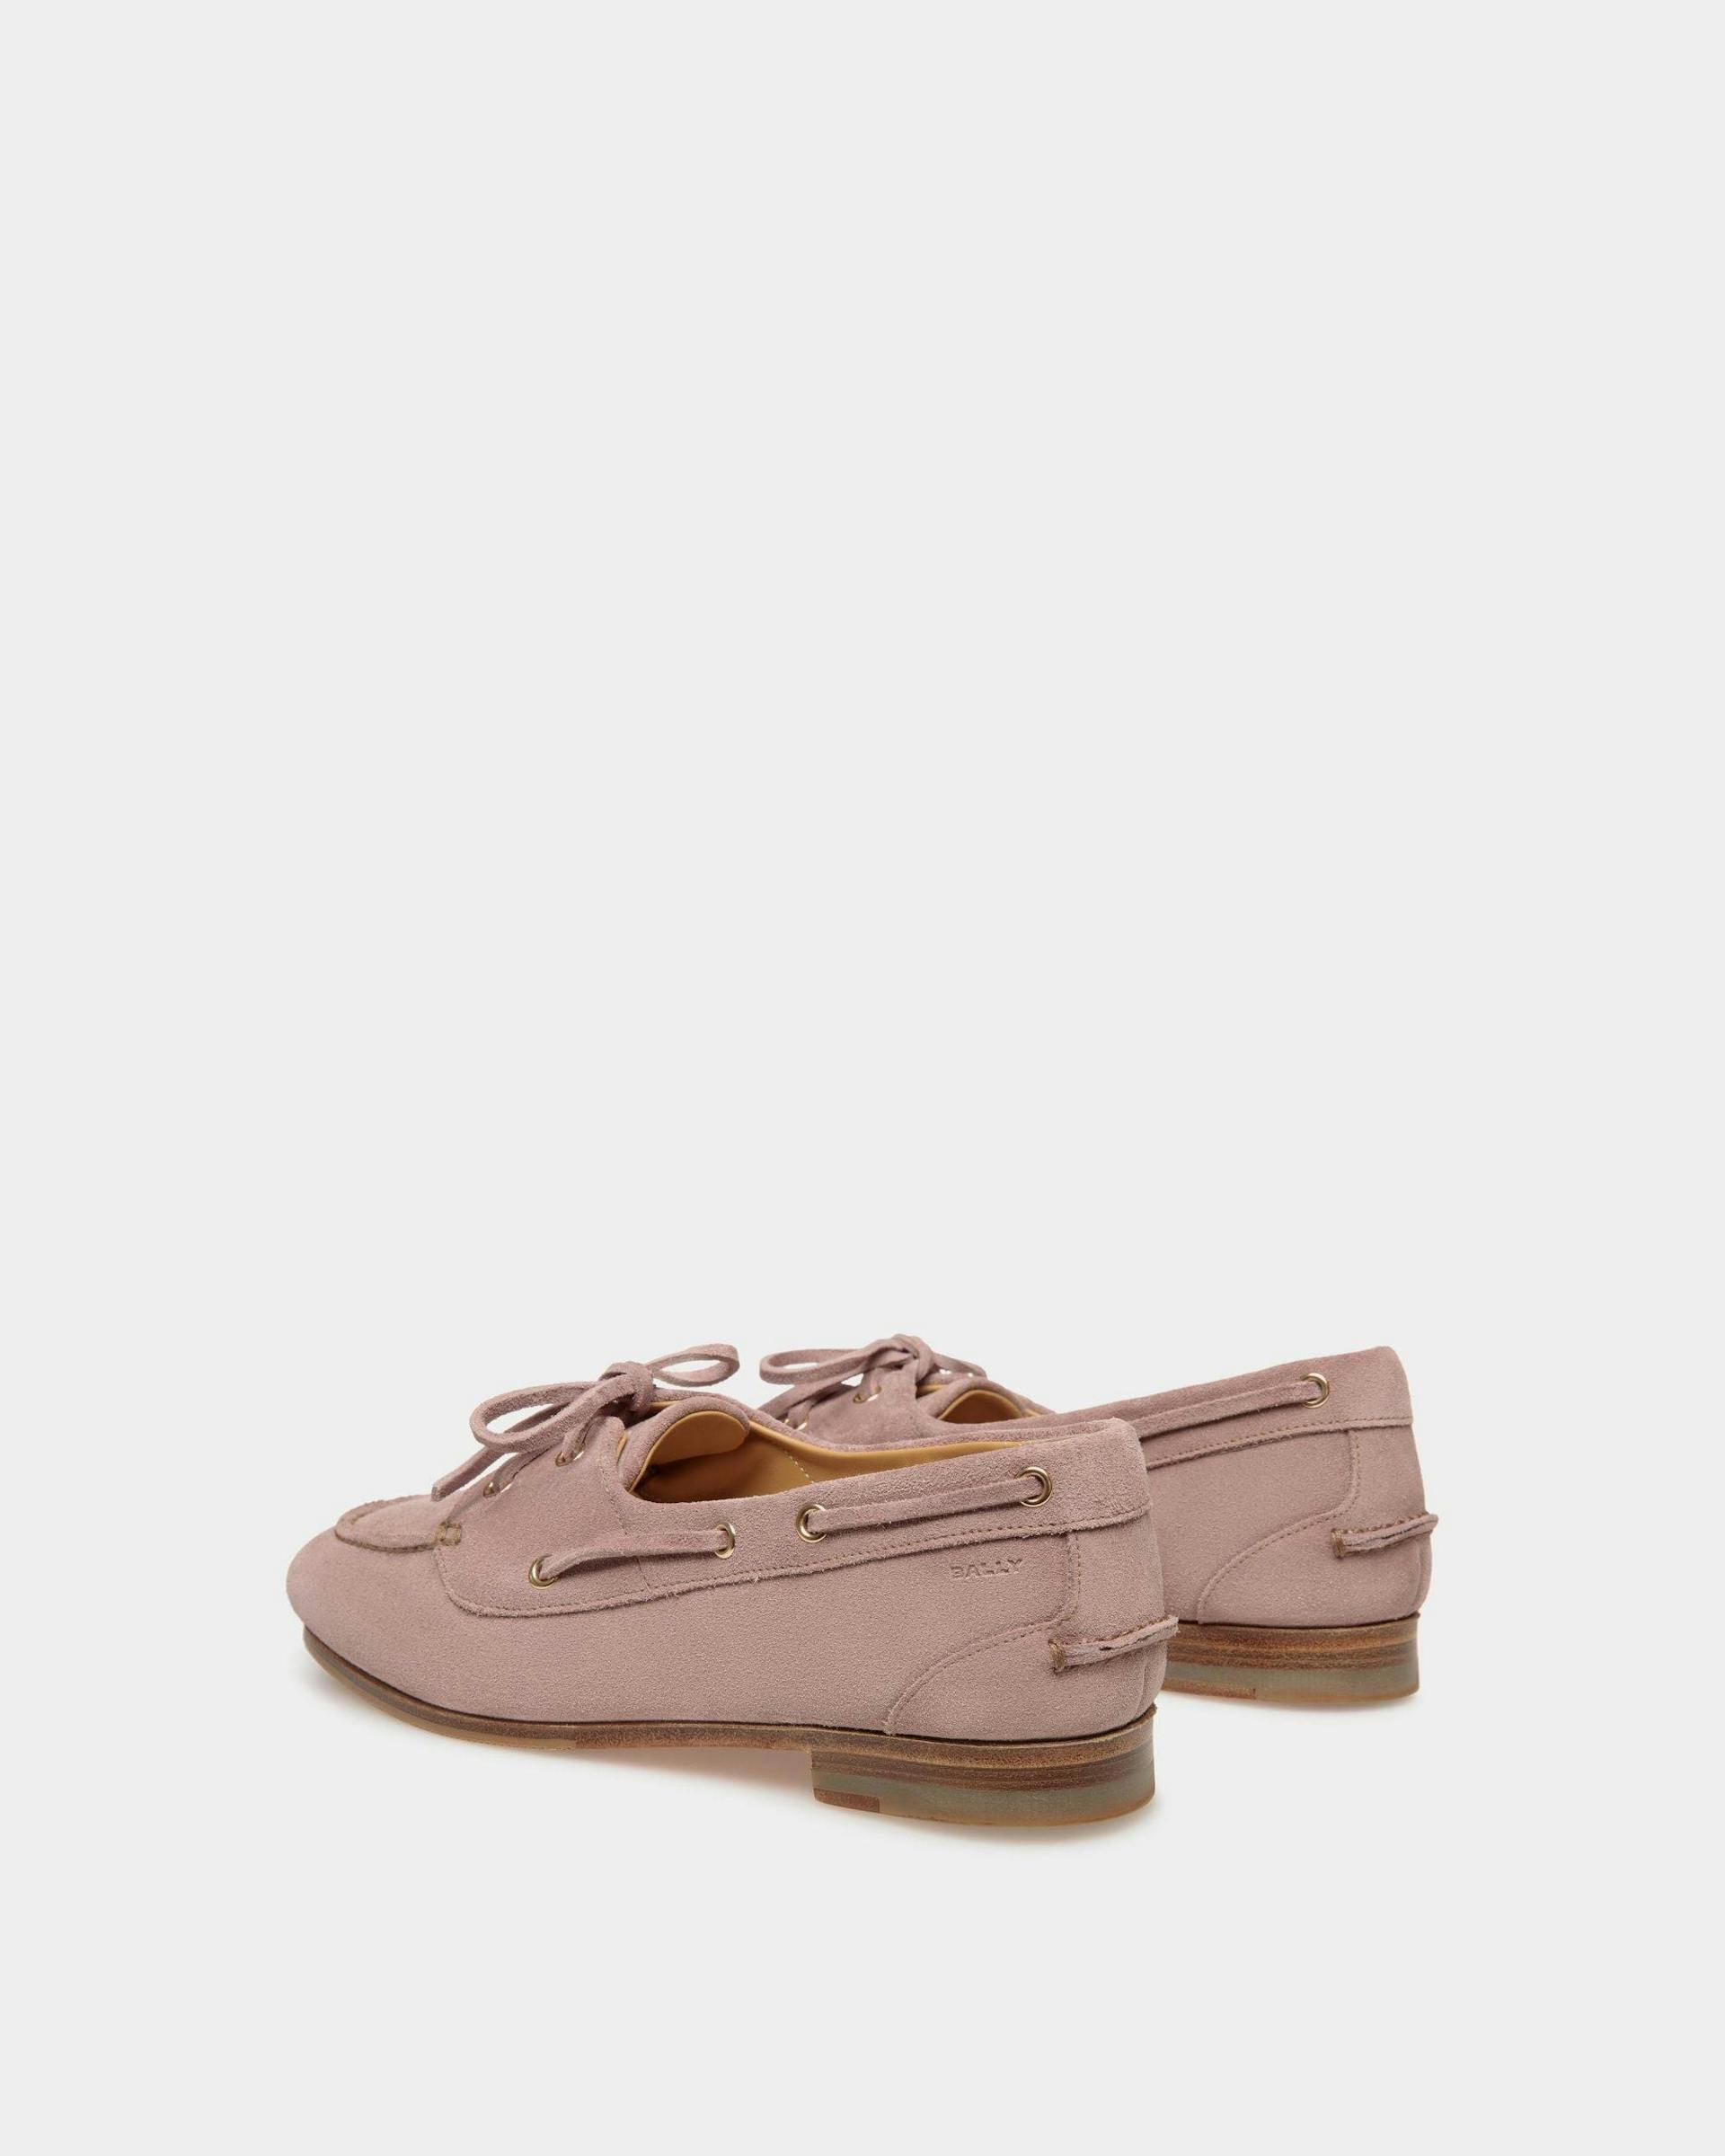 Women's Plume Moccasin in Light Mauve Suede | Bally | Still Life 3/4 Back